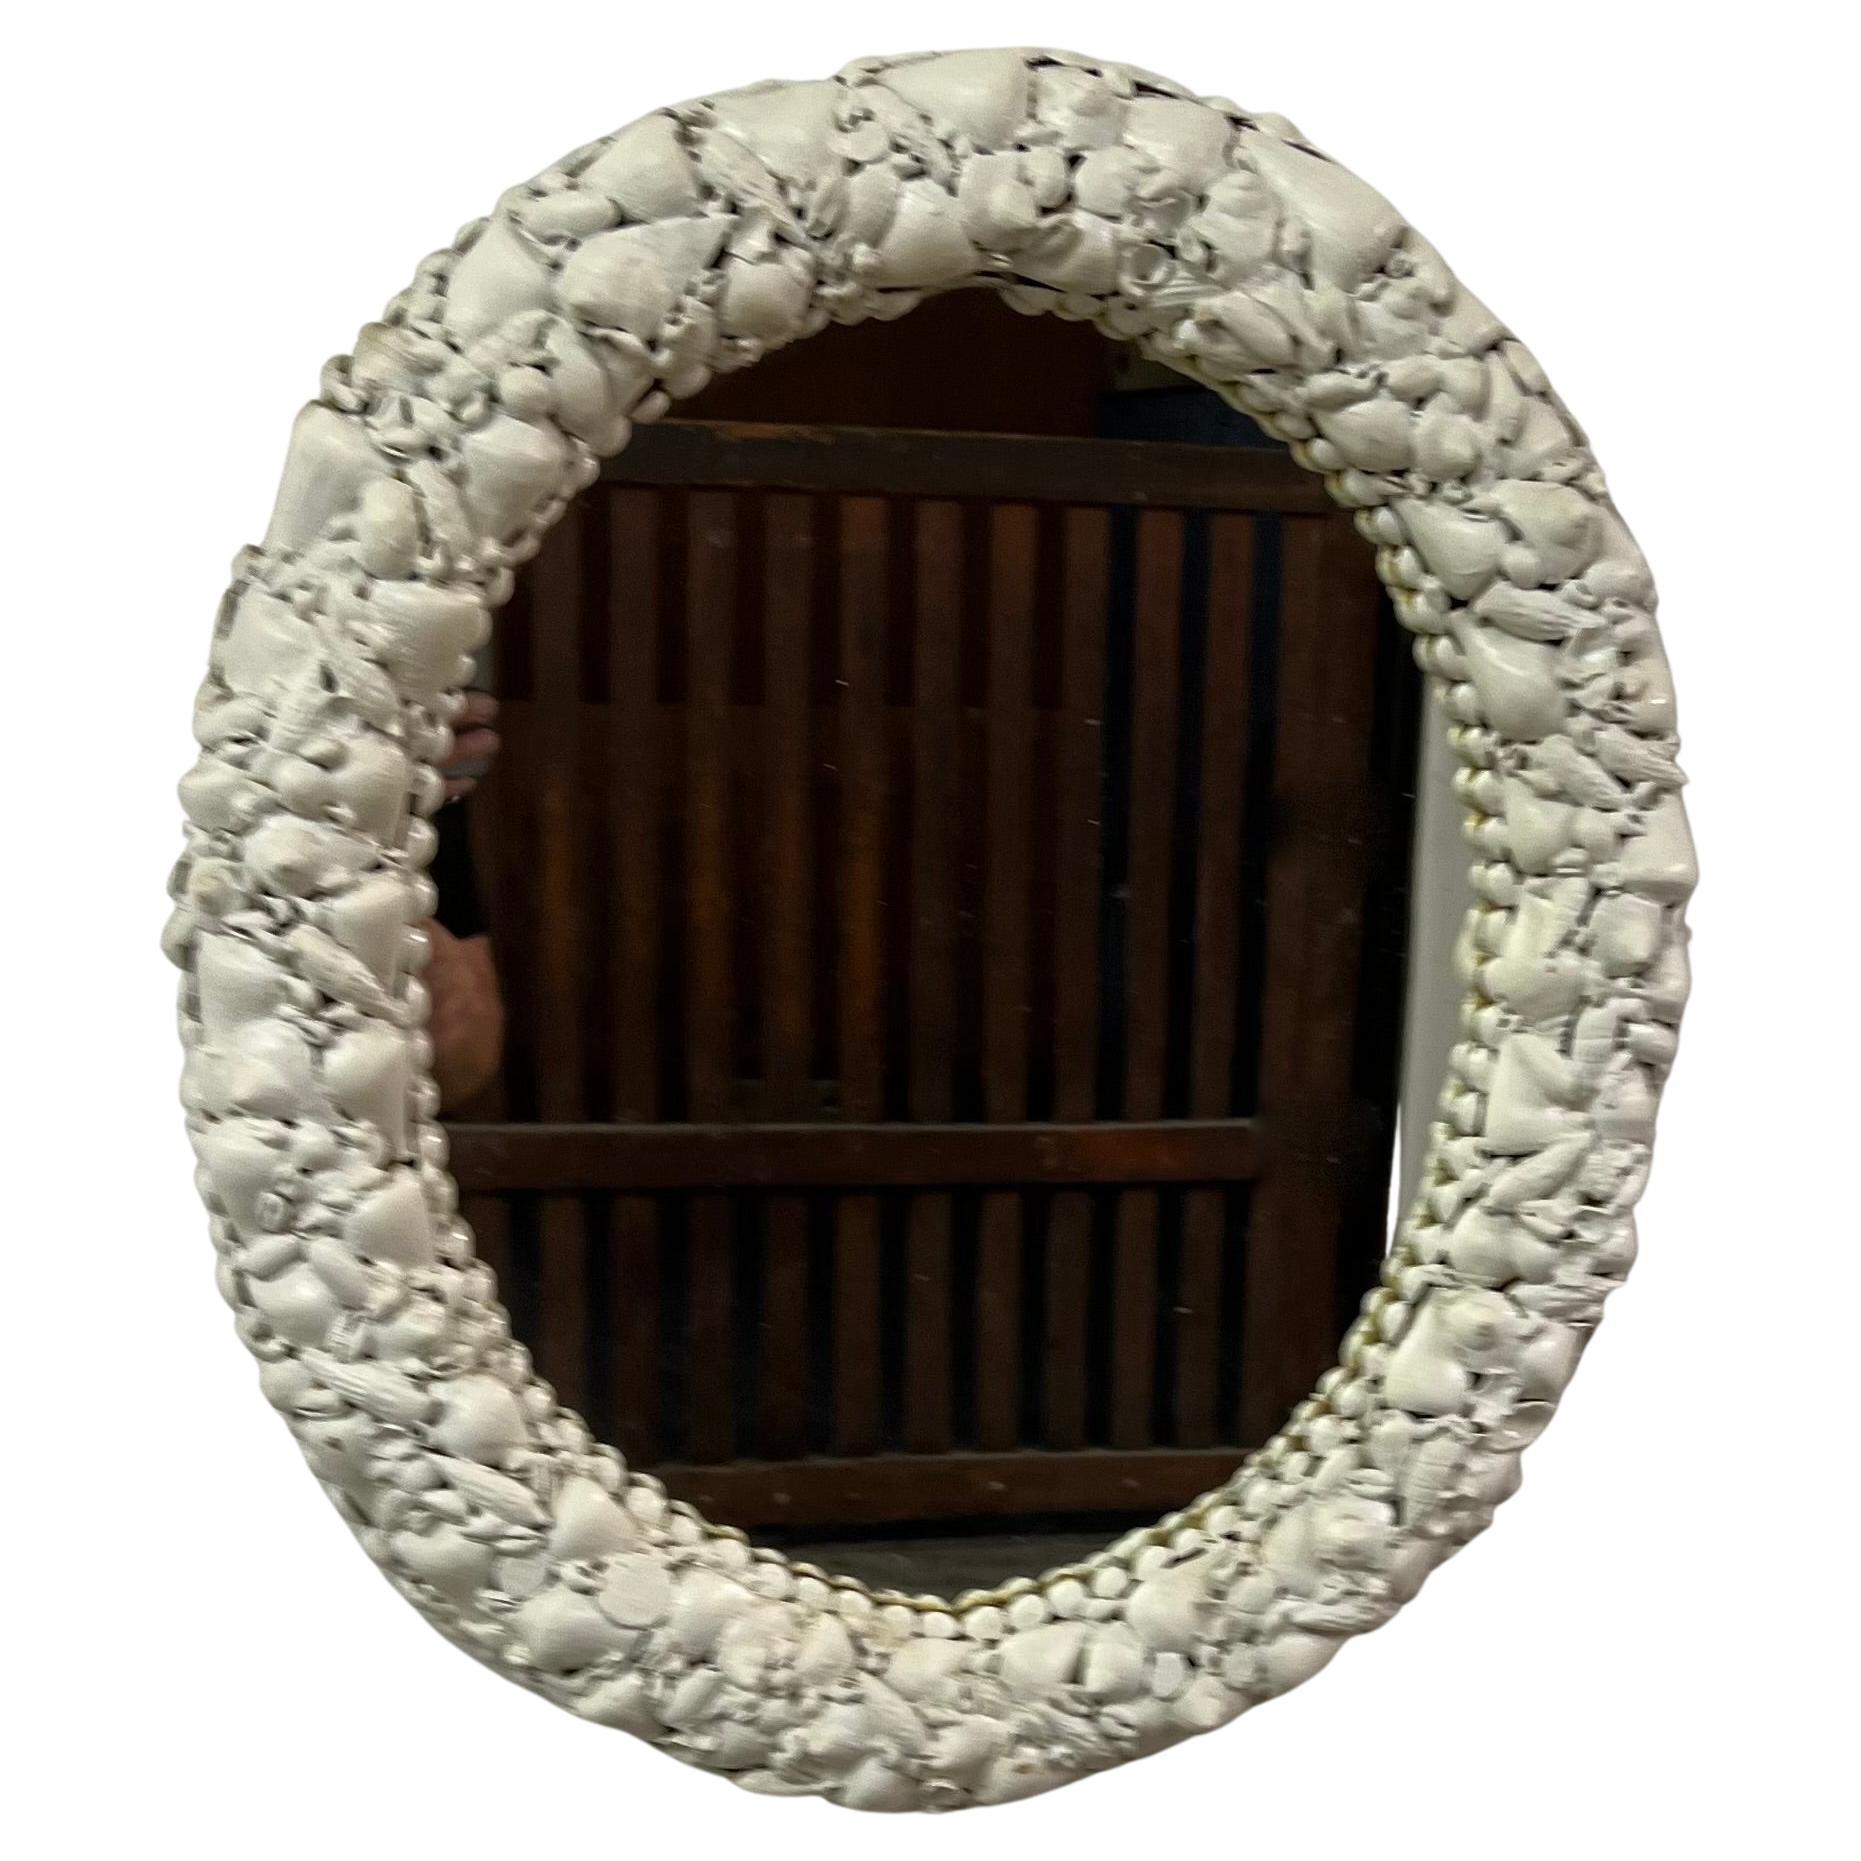 Oval wall hanging mirror with white shelf detail. This mirror is surrounded by hundreds of white shells. A wonderful addition to any room, particularly nice for seaside or beach-themed homes.